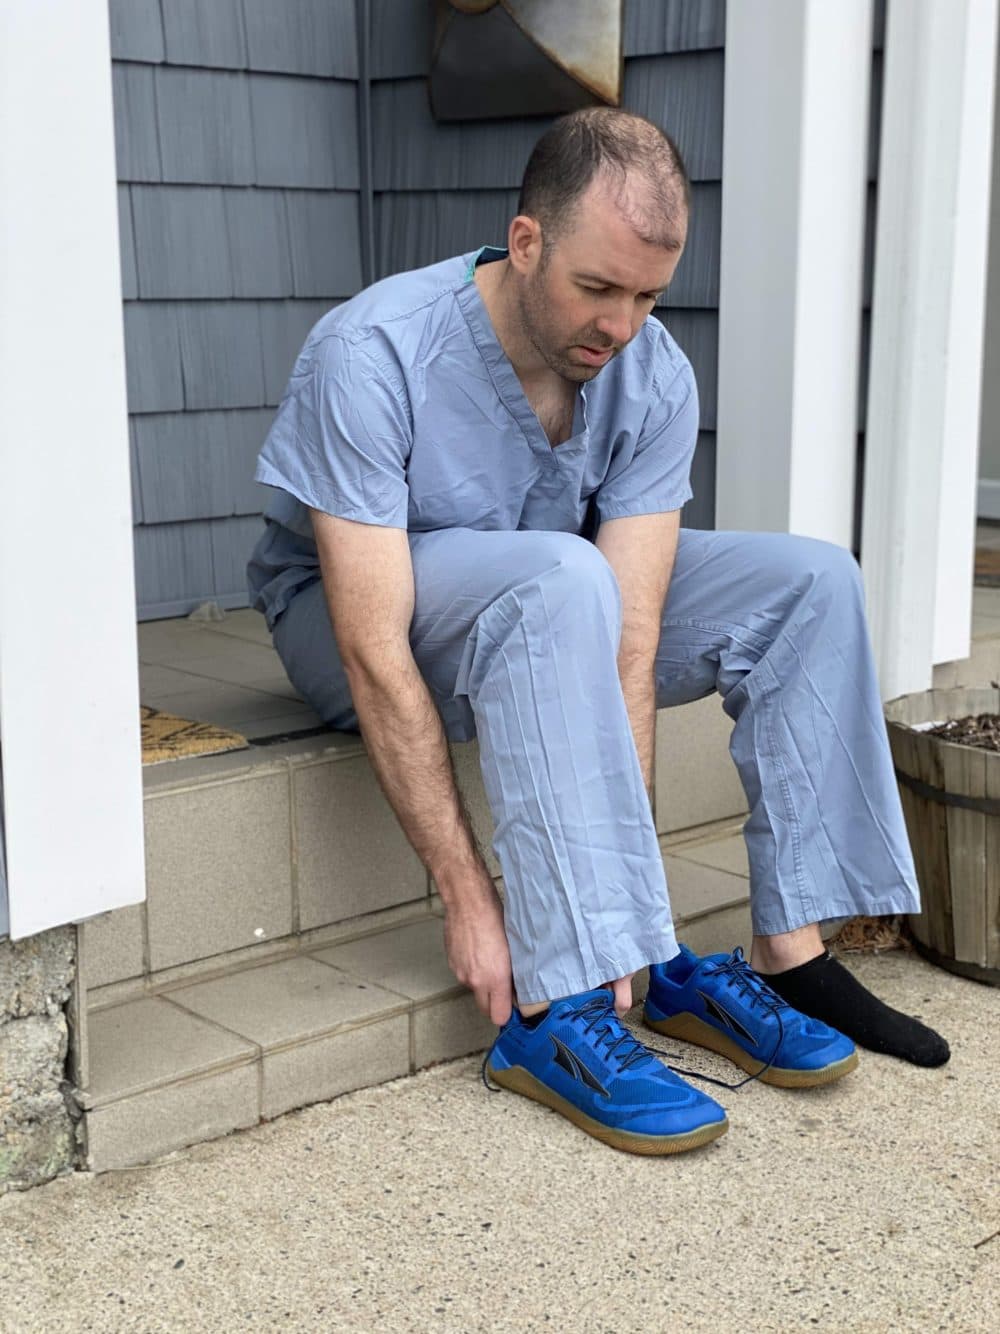 Joshua Merson, an emergency medicine physician assistant, takes his shoe and clothes off on their condo porch in Chelsea so that nothing contaminated comes into the house. (Courtesy Joshua Merson)